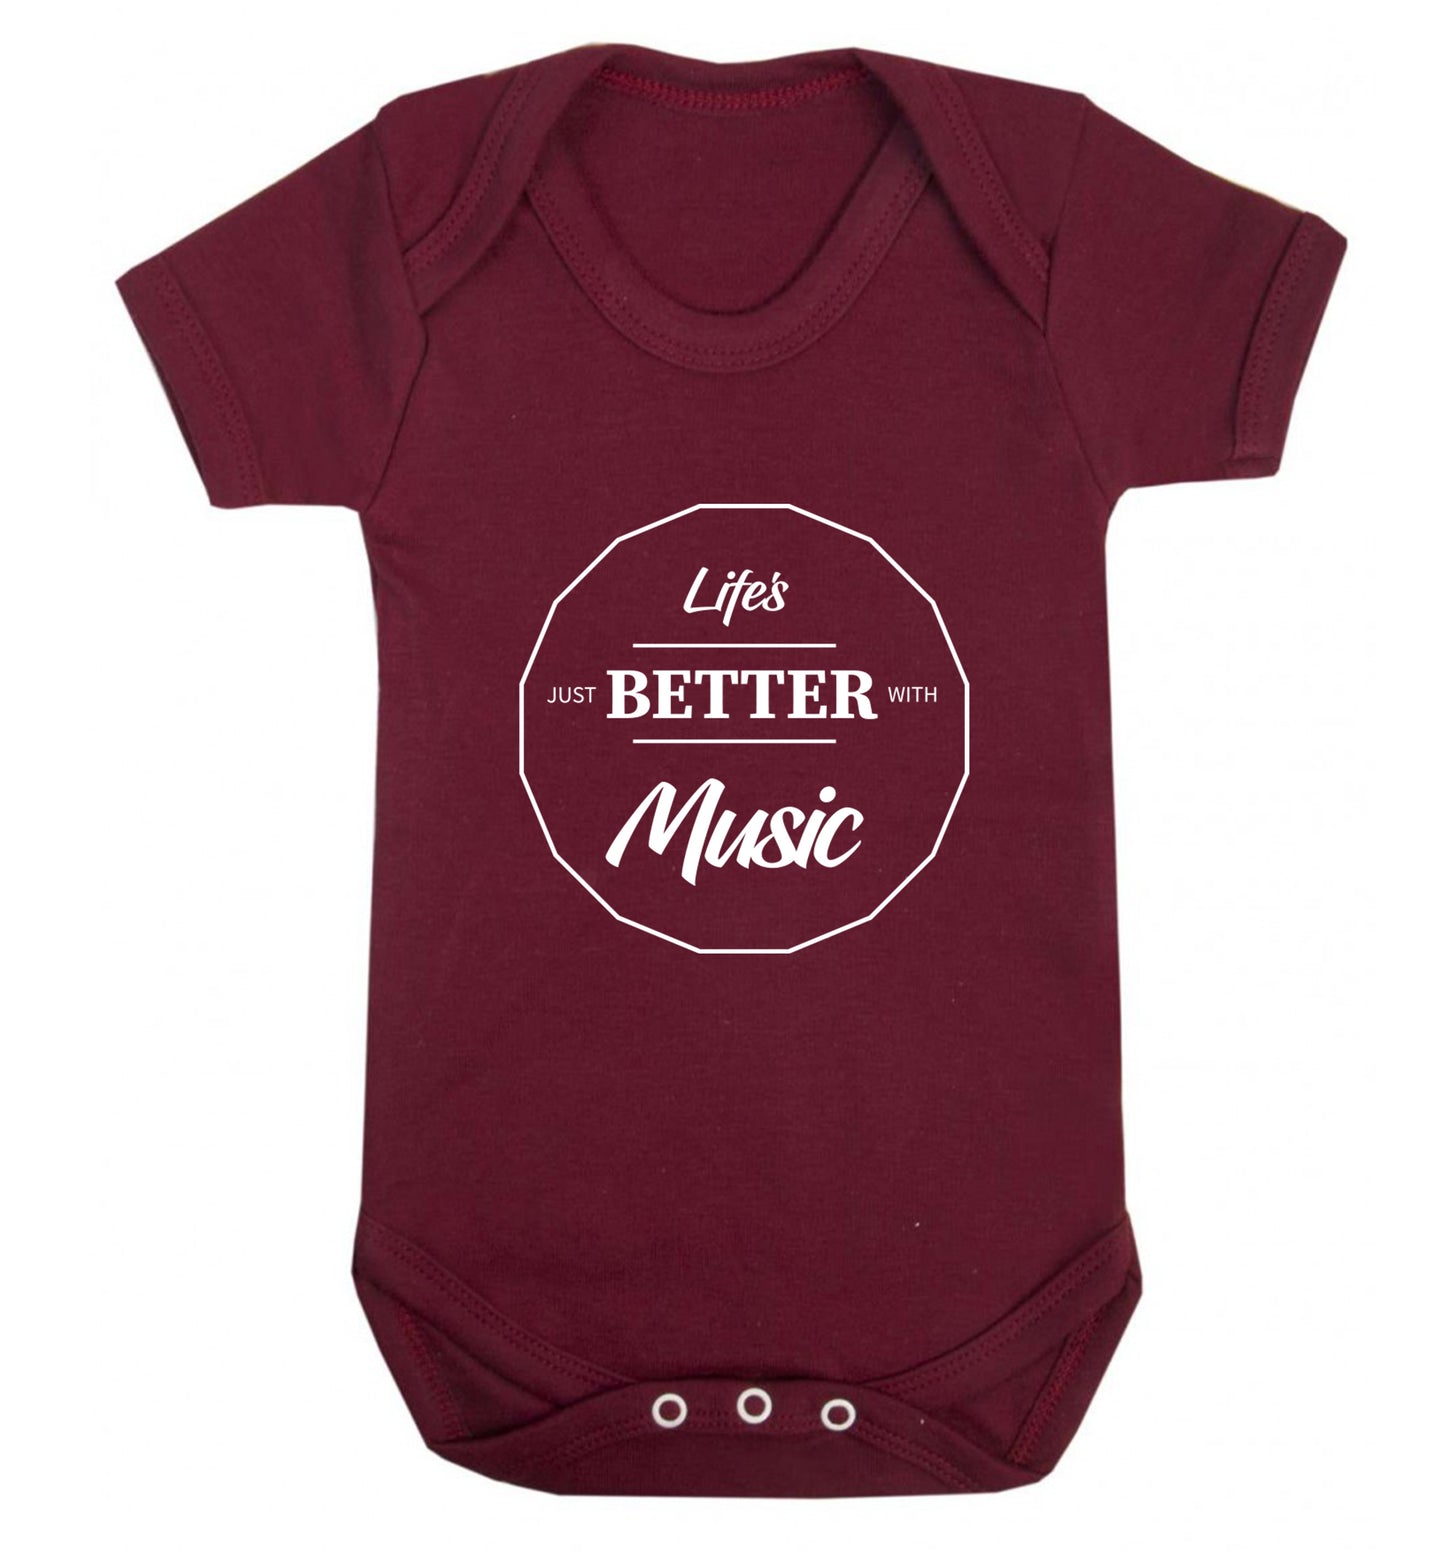 Life is Better With Music Baby Vest maroon 18-24 months